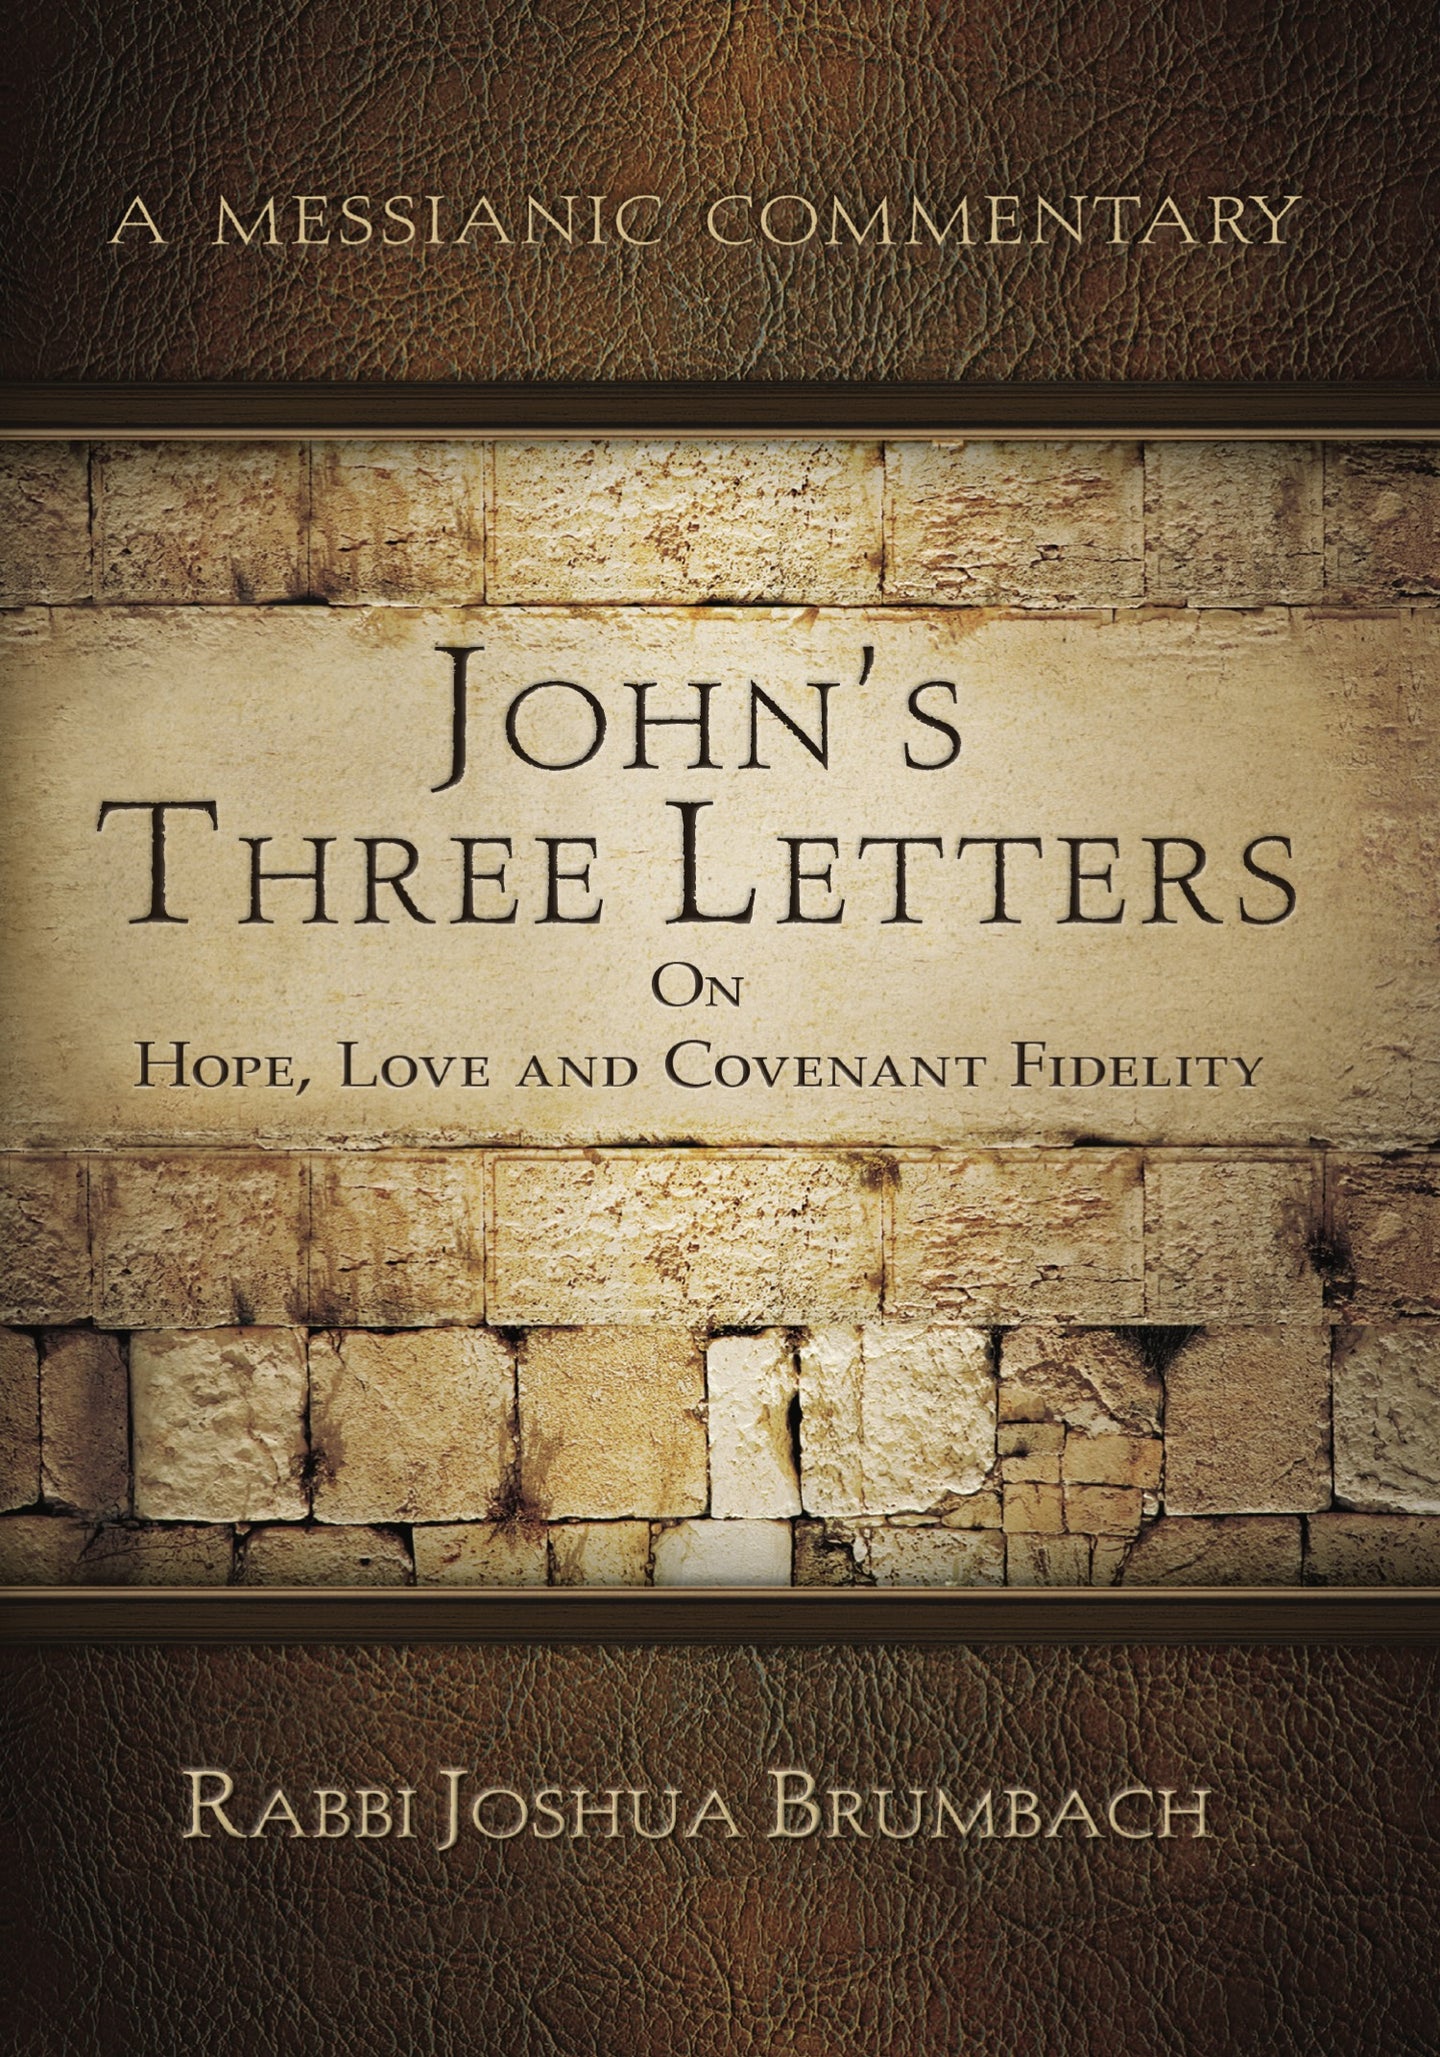 A Messianic Commentary - John's Three Letters On Hope, Love and Covenant Fidelity by Rabbi Joshua Brumbach